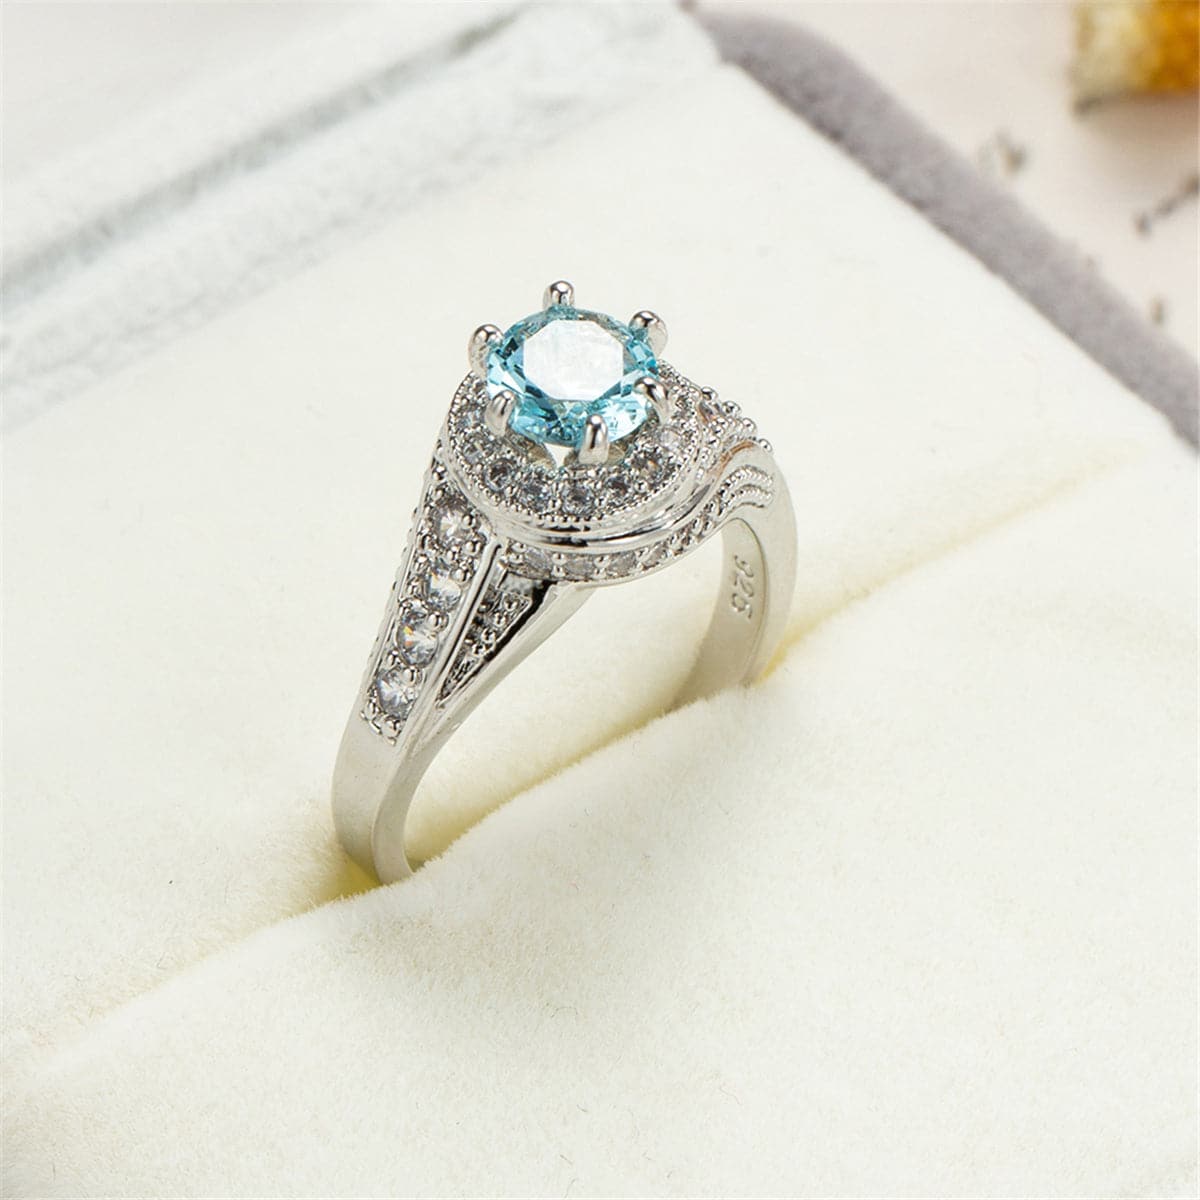 Sea Blue Cubic Zirconia & Silver-Plated Round Ring